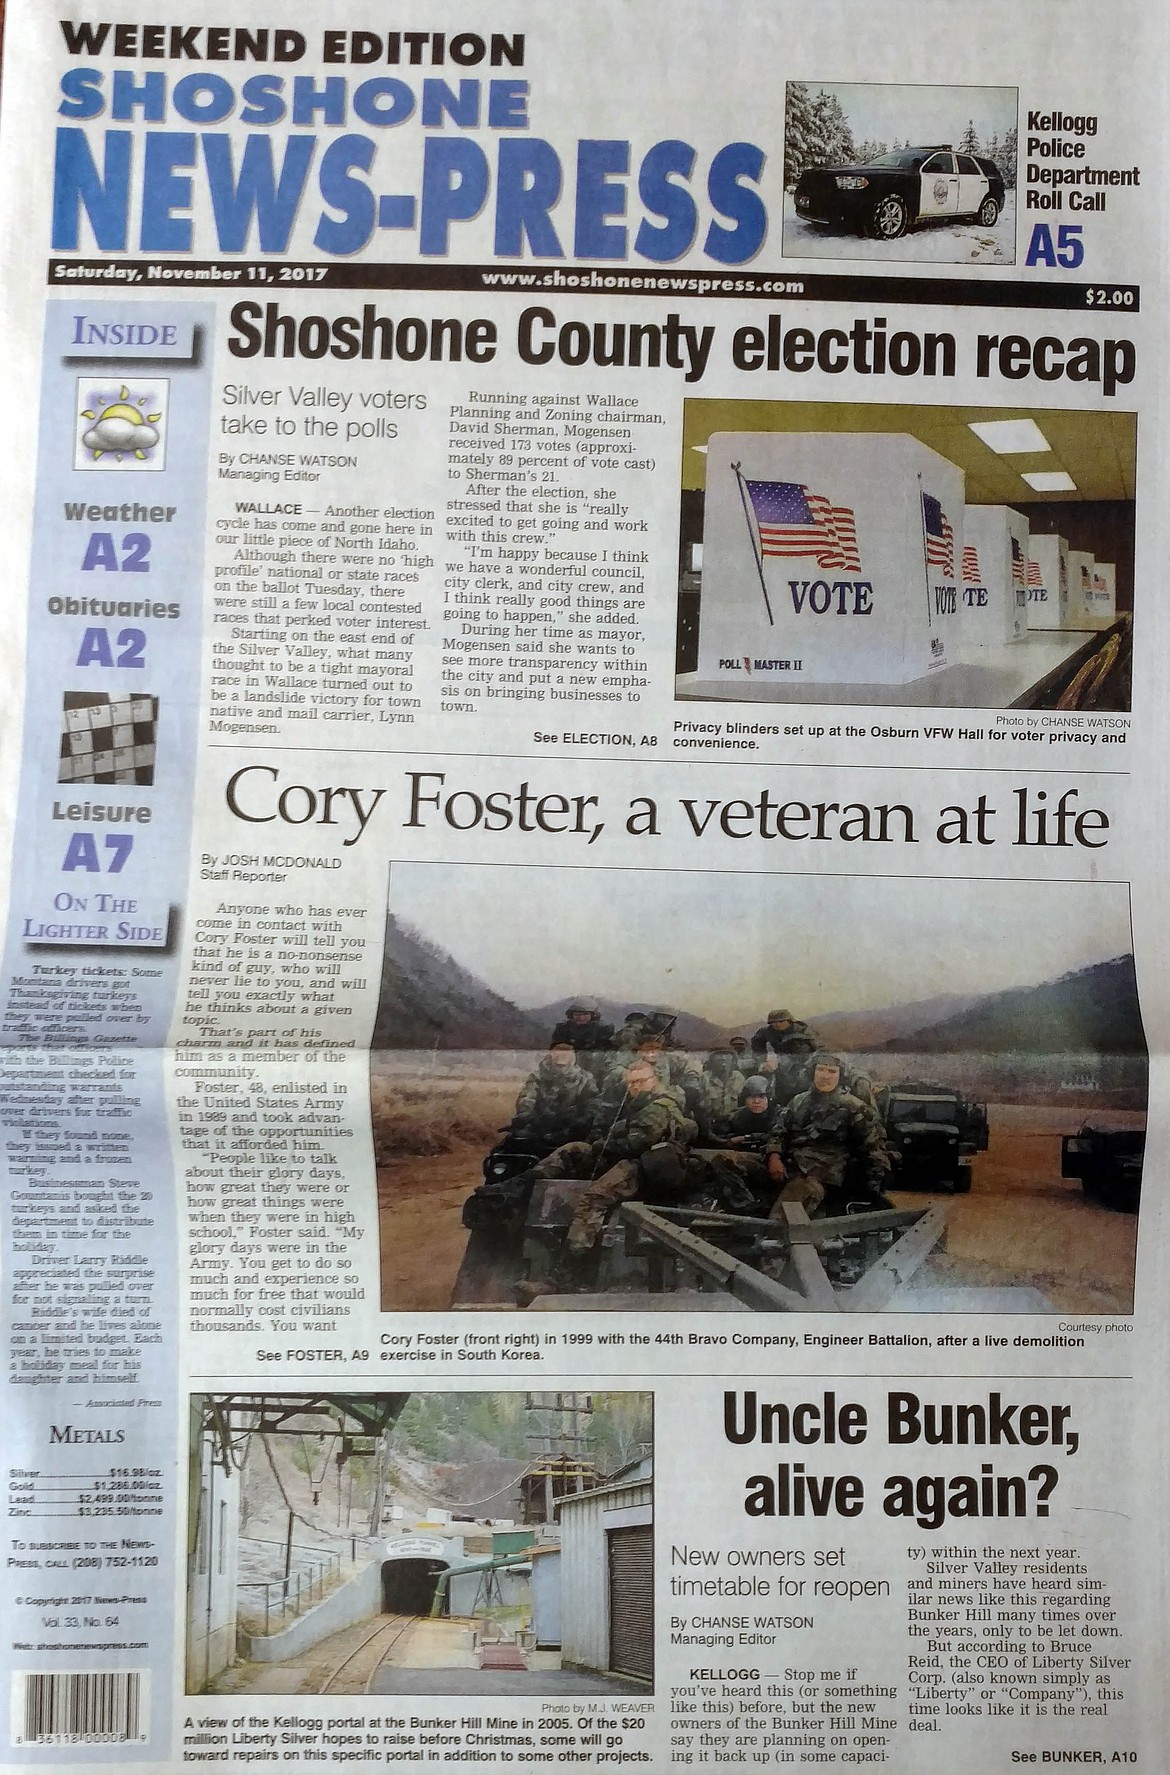 The Shoshone News-Press highlights local election results, local veterans, and the new owners of the Bunker Hill Mine all in one edition.